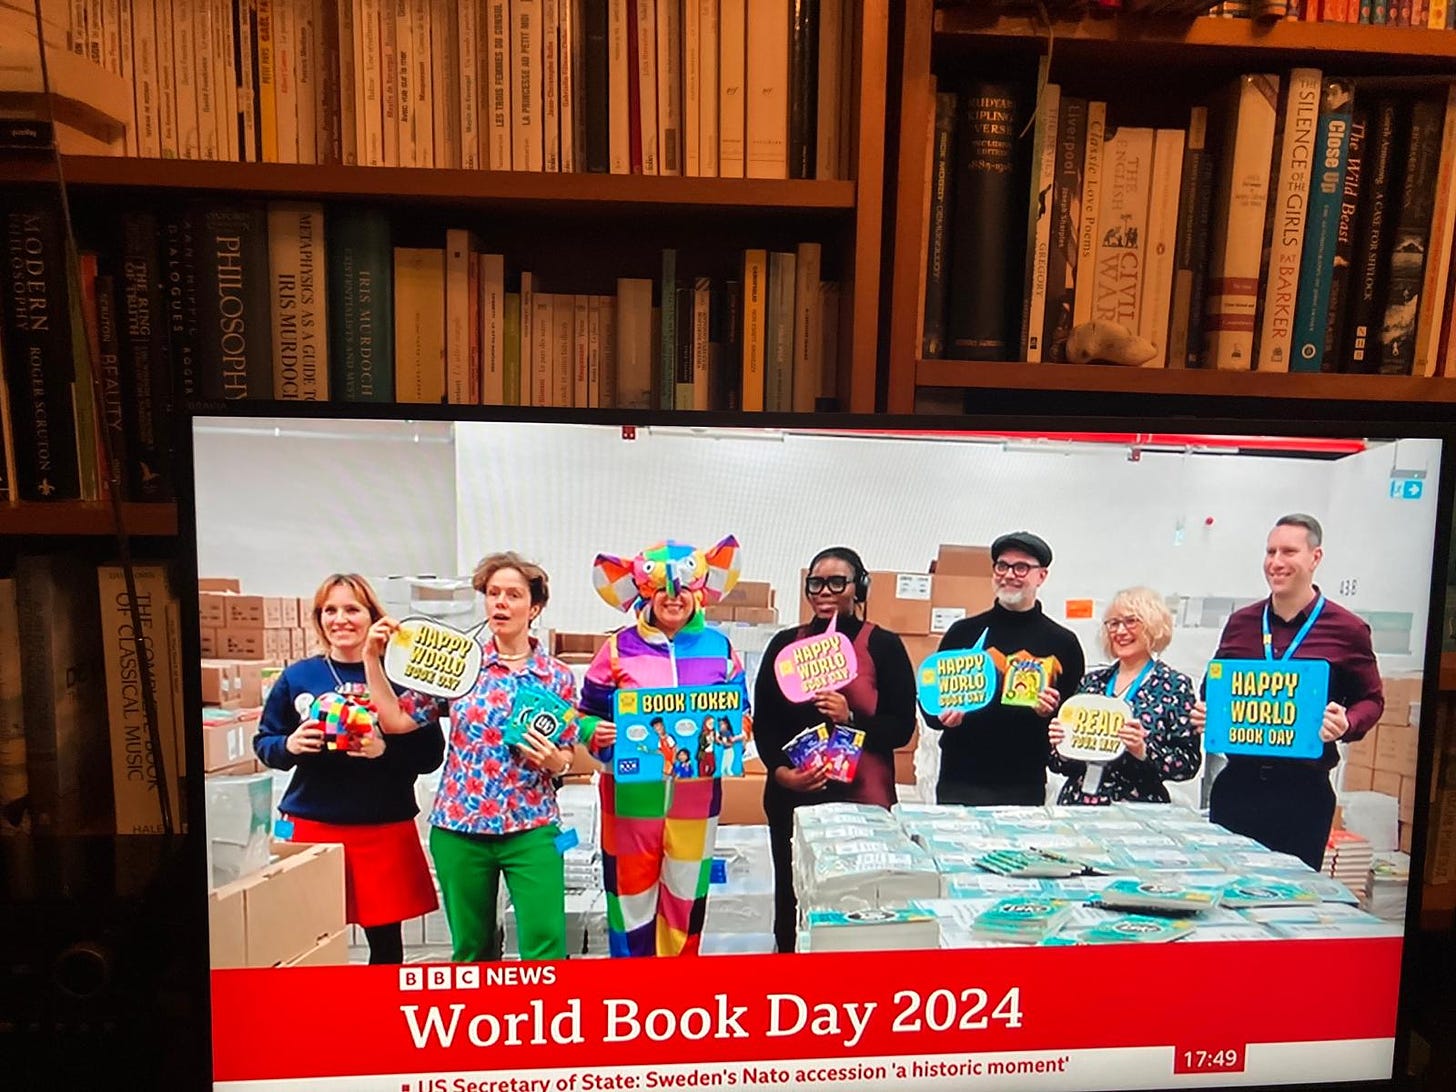 World book day authors on telly, photo credit my mum